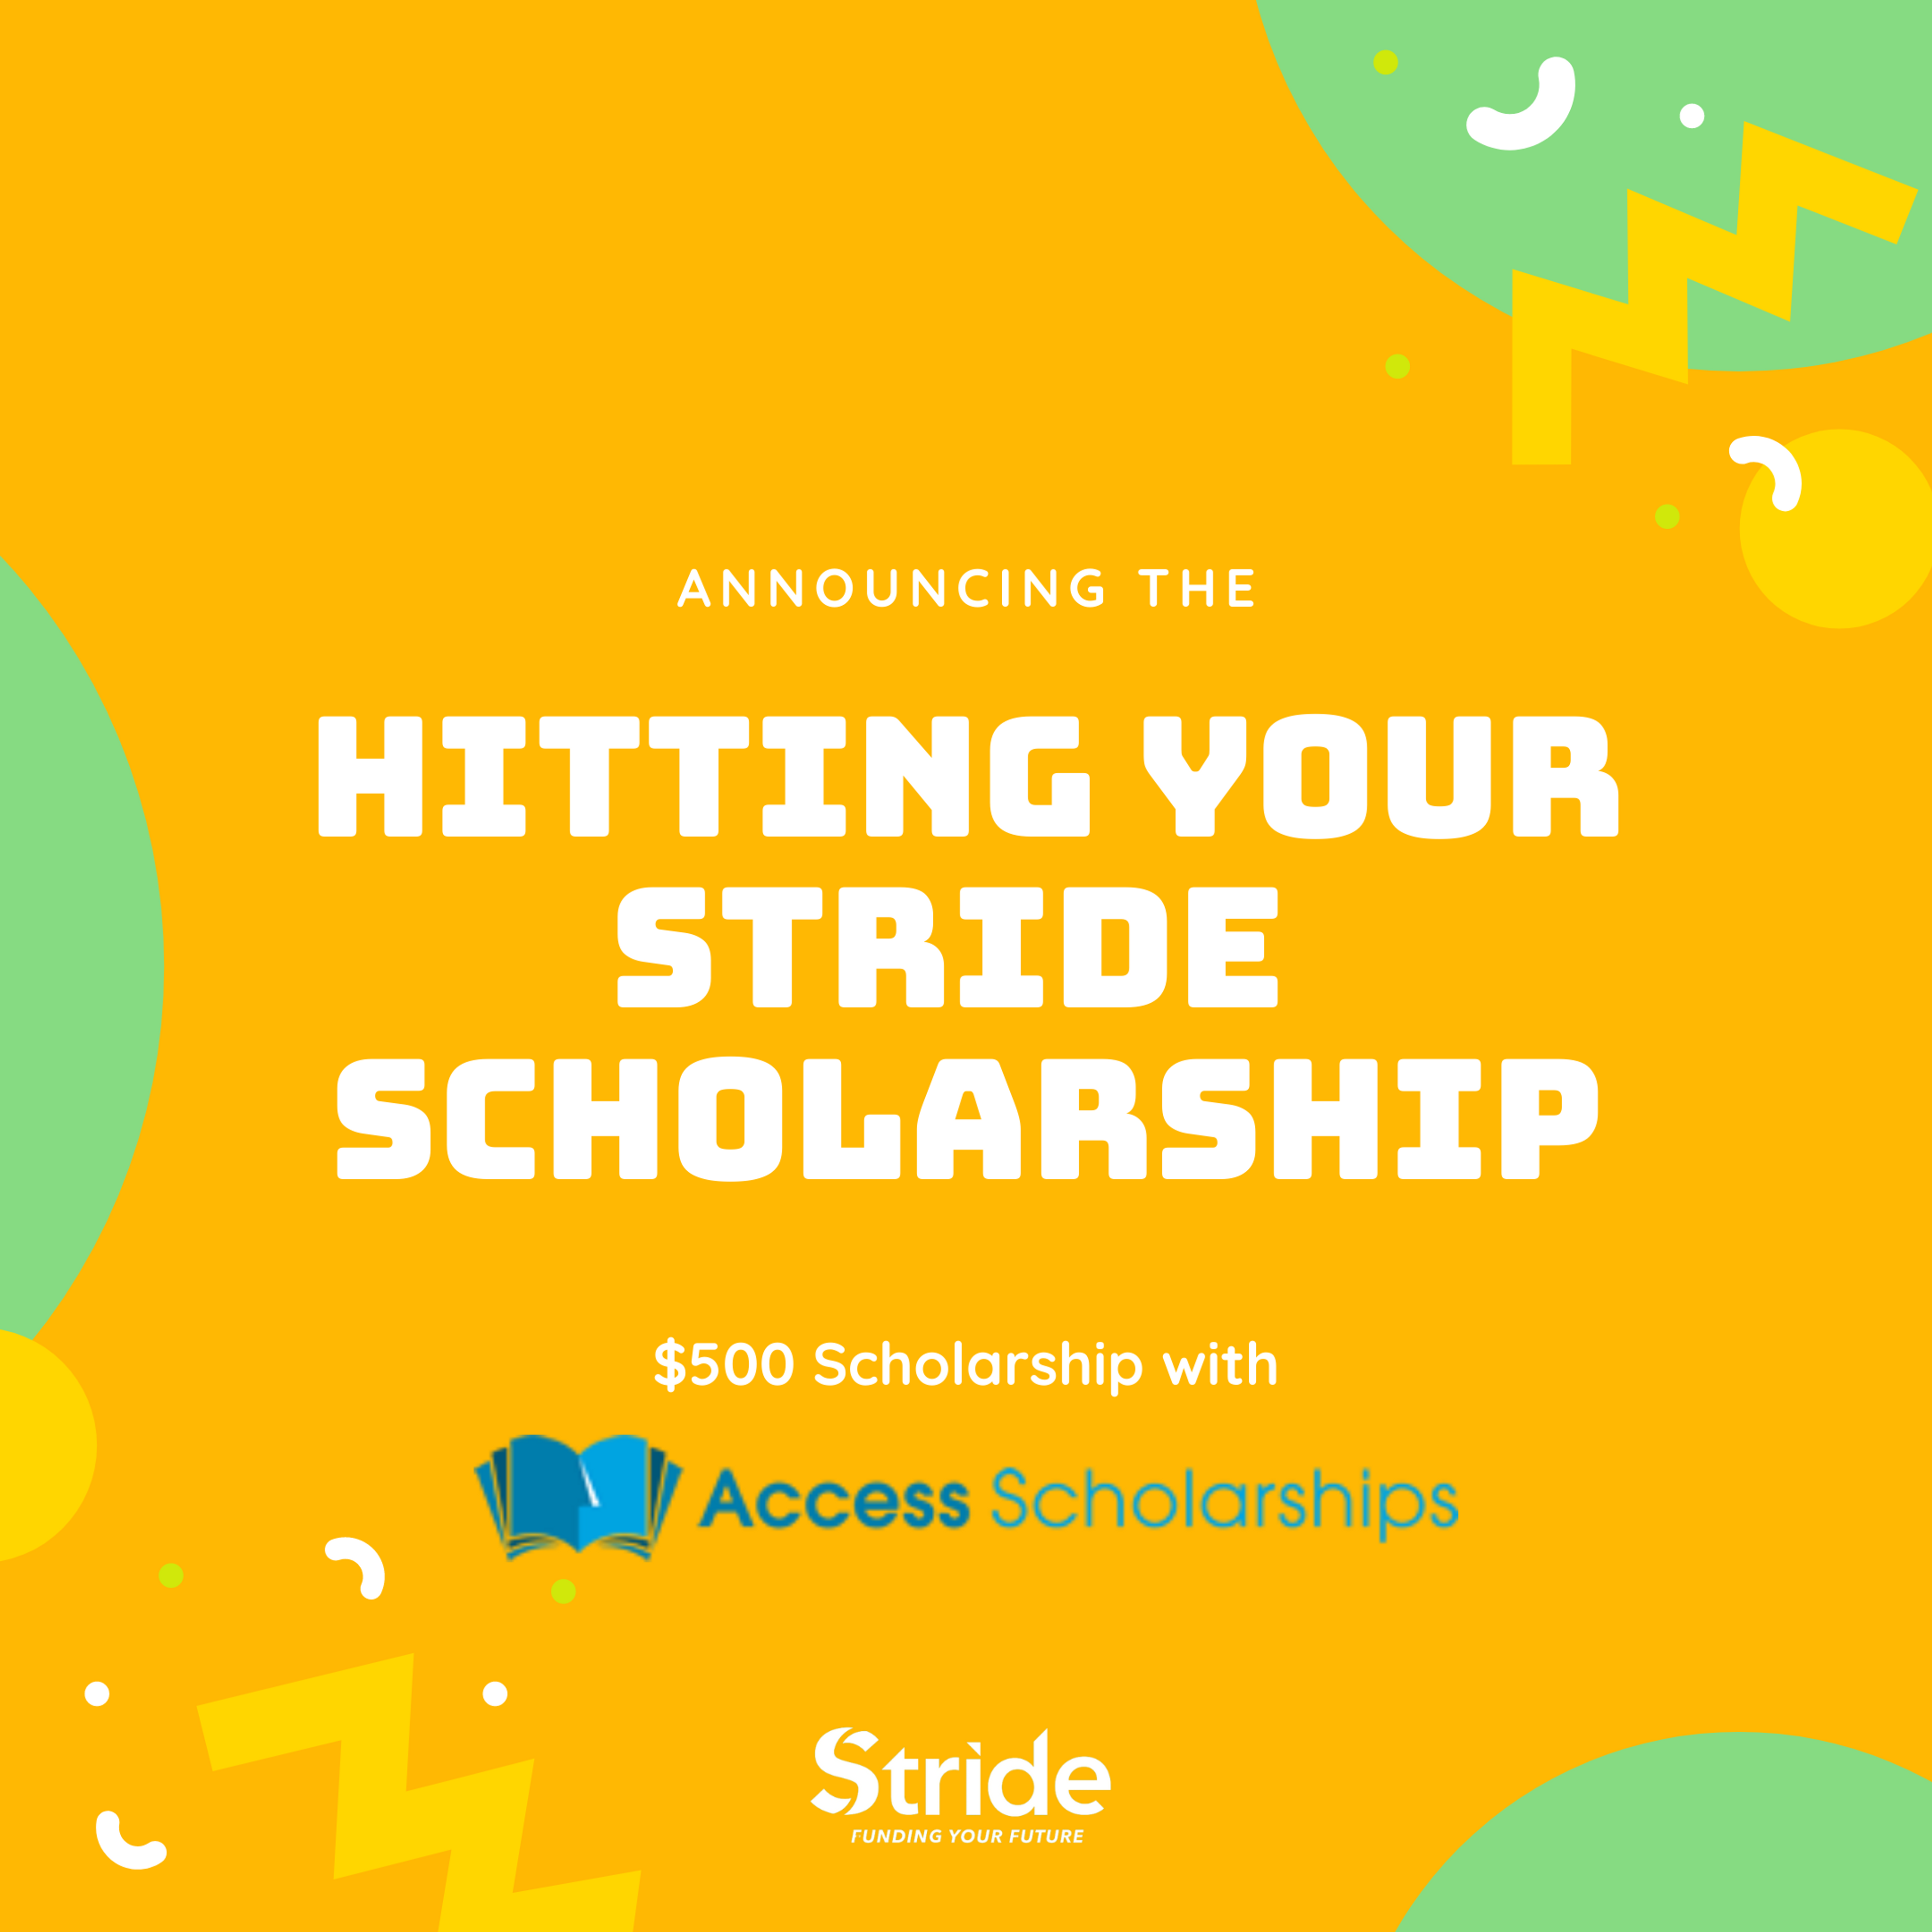 Access Scholarships: Income Share Agreements - The Student Loan Alternative Rising in Popularity